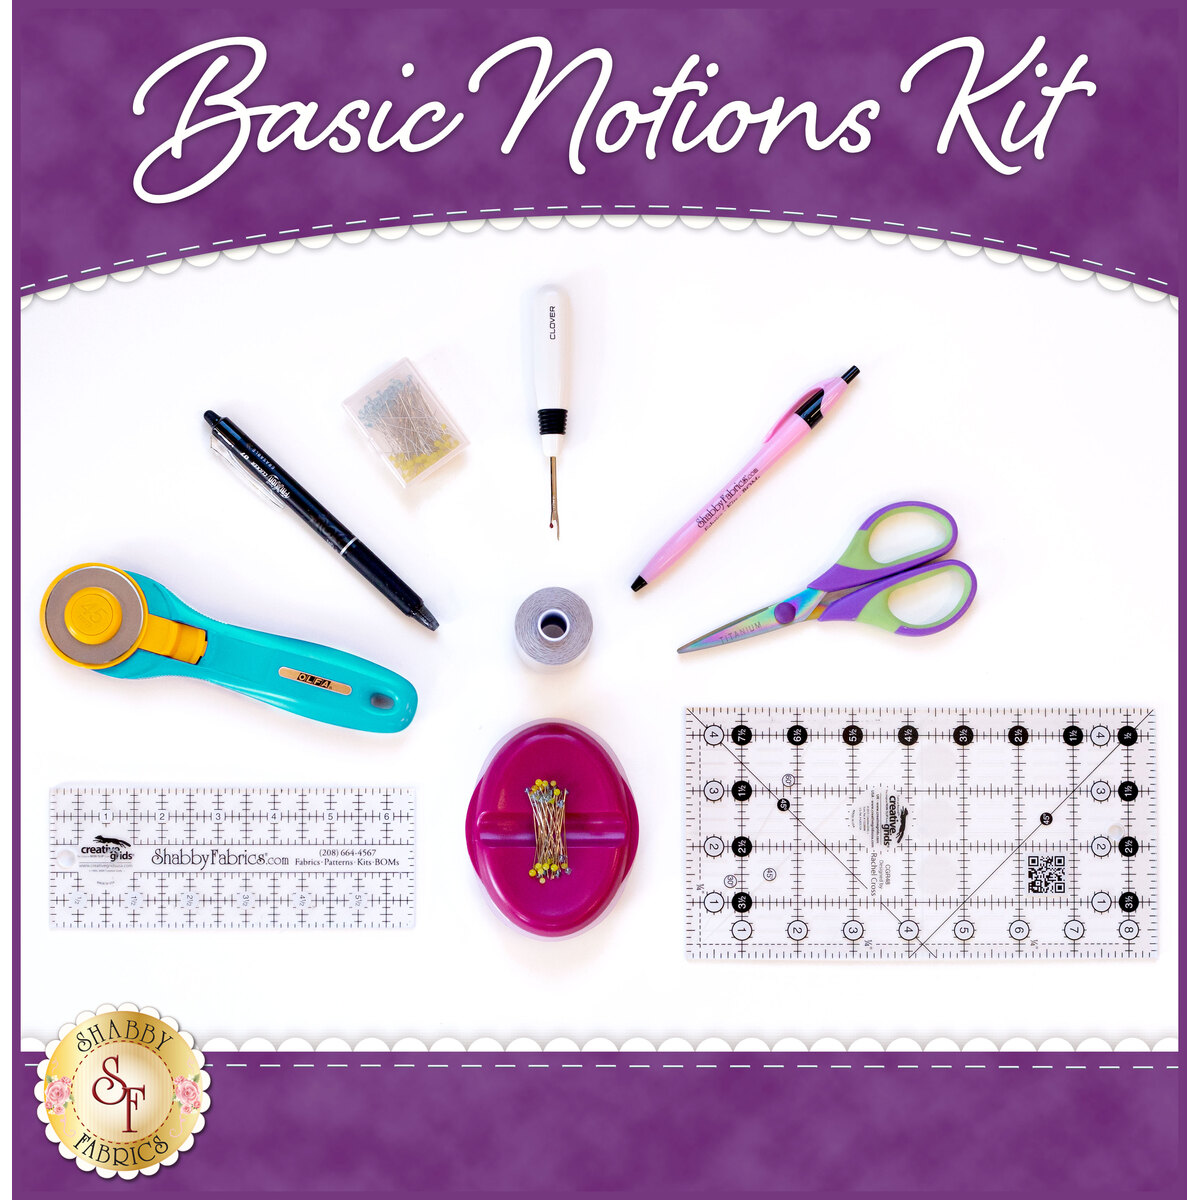 Basic Quilting Supplies for Beginners